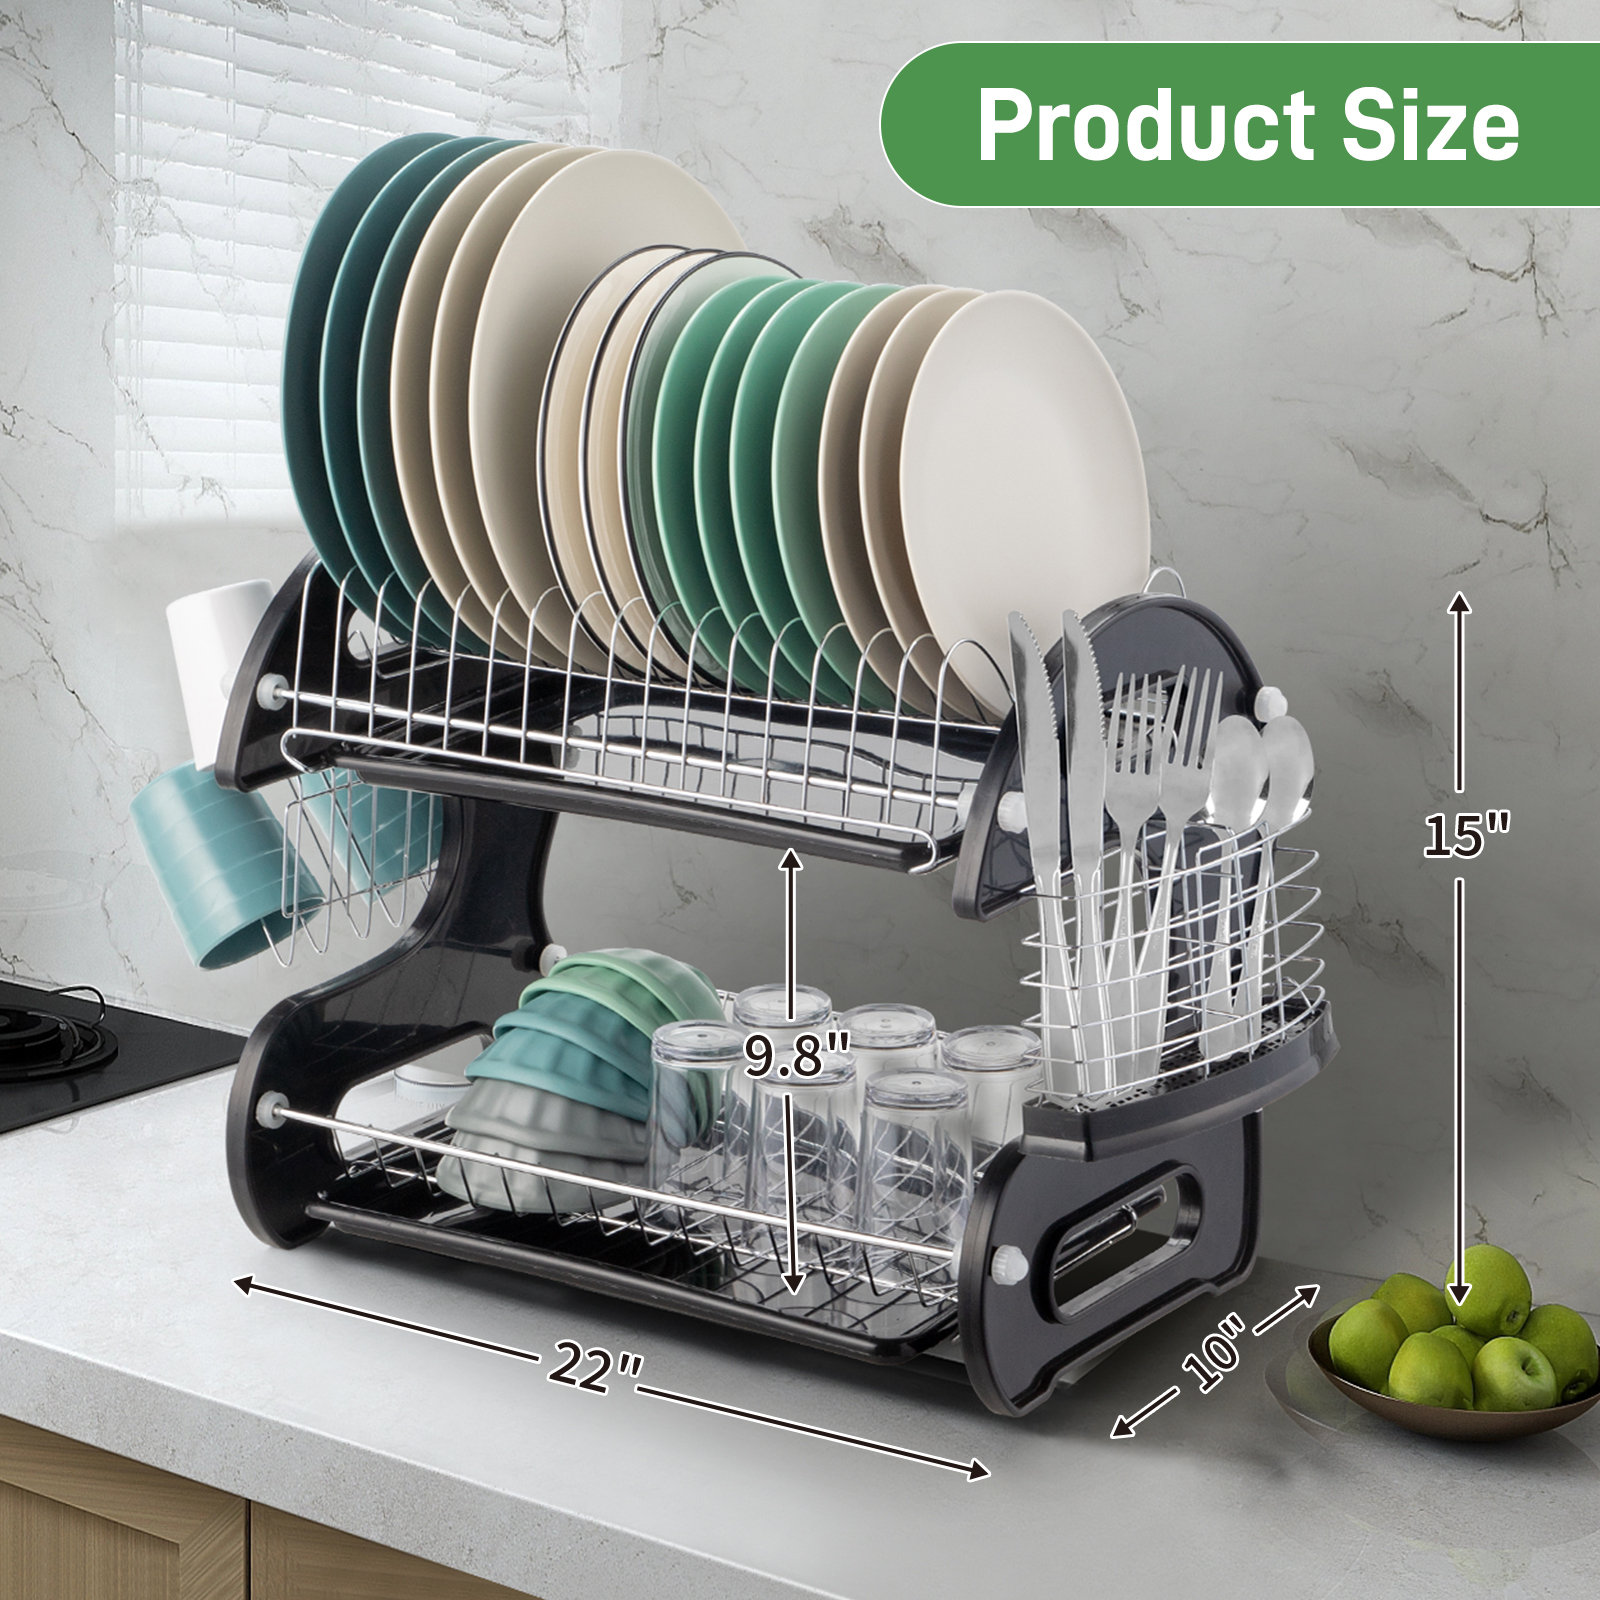 Ktaxon 2 Tier Dish Drainer Drying Rack Large Capacity Kitchen Storage Stainless Steel Holder,Washing Organizer - Overall Dimensions: 22.83" x 11" x 14.57" (L x W x H) - image 2 of 10